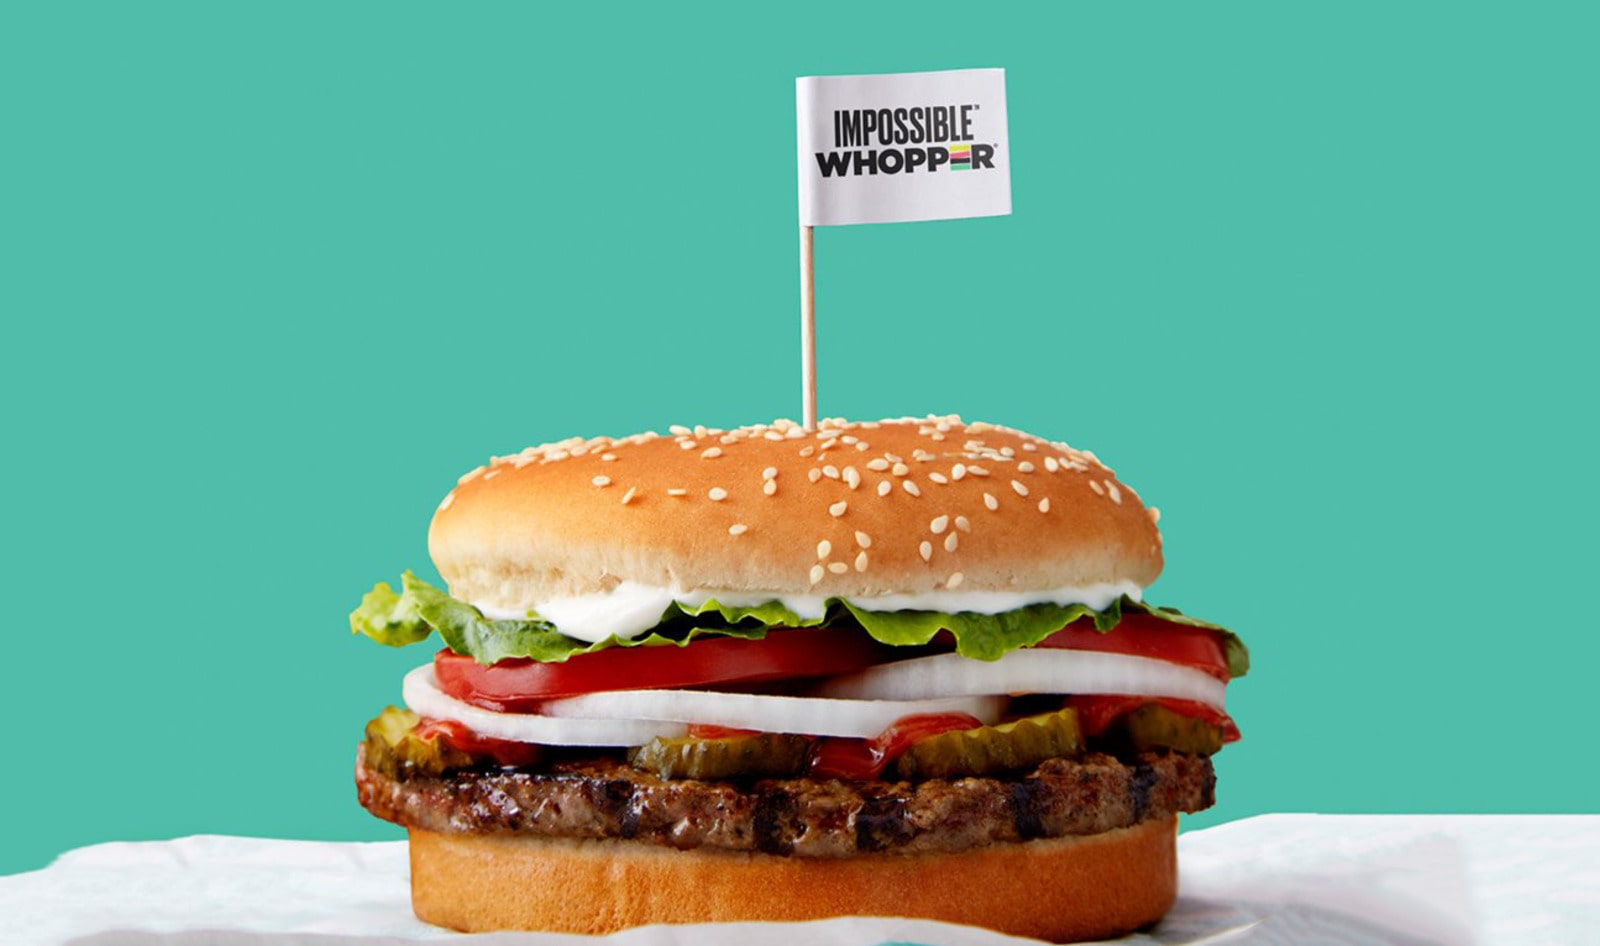 New York Burger King Tricks Customers into Buying Beef Instead of Impossible Whoppers